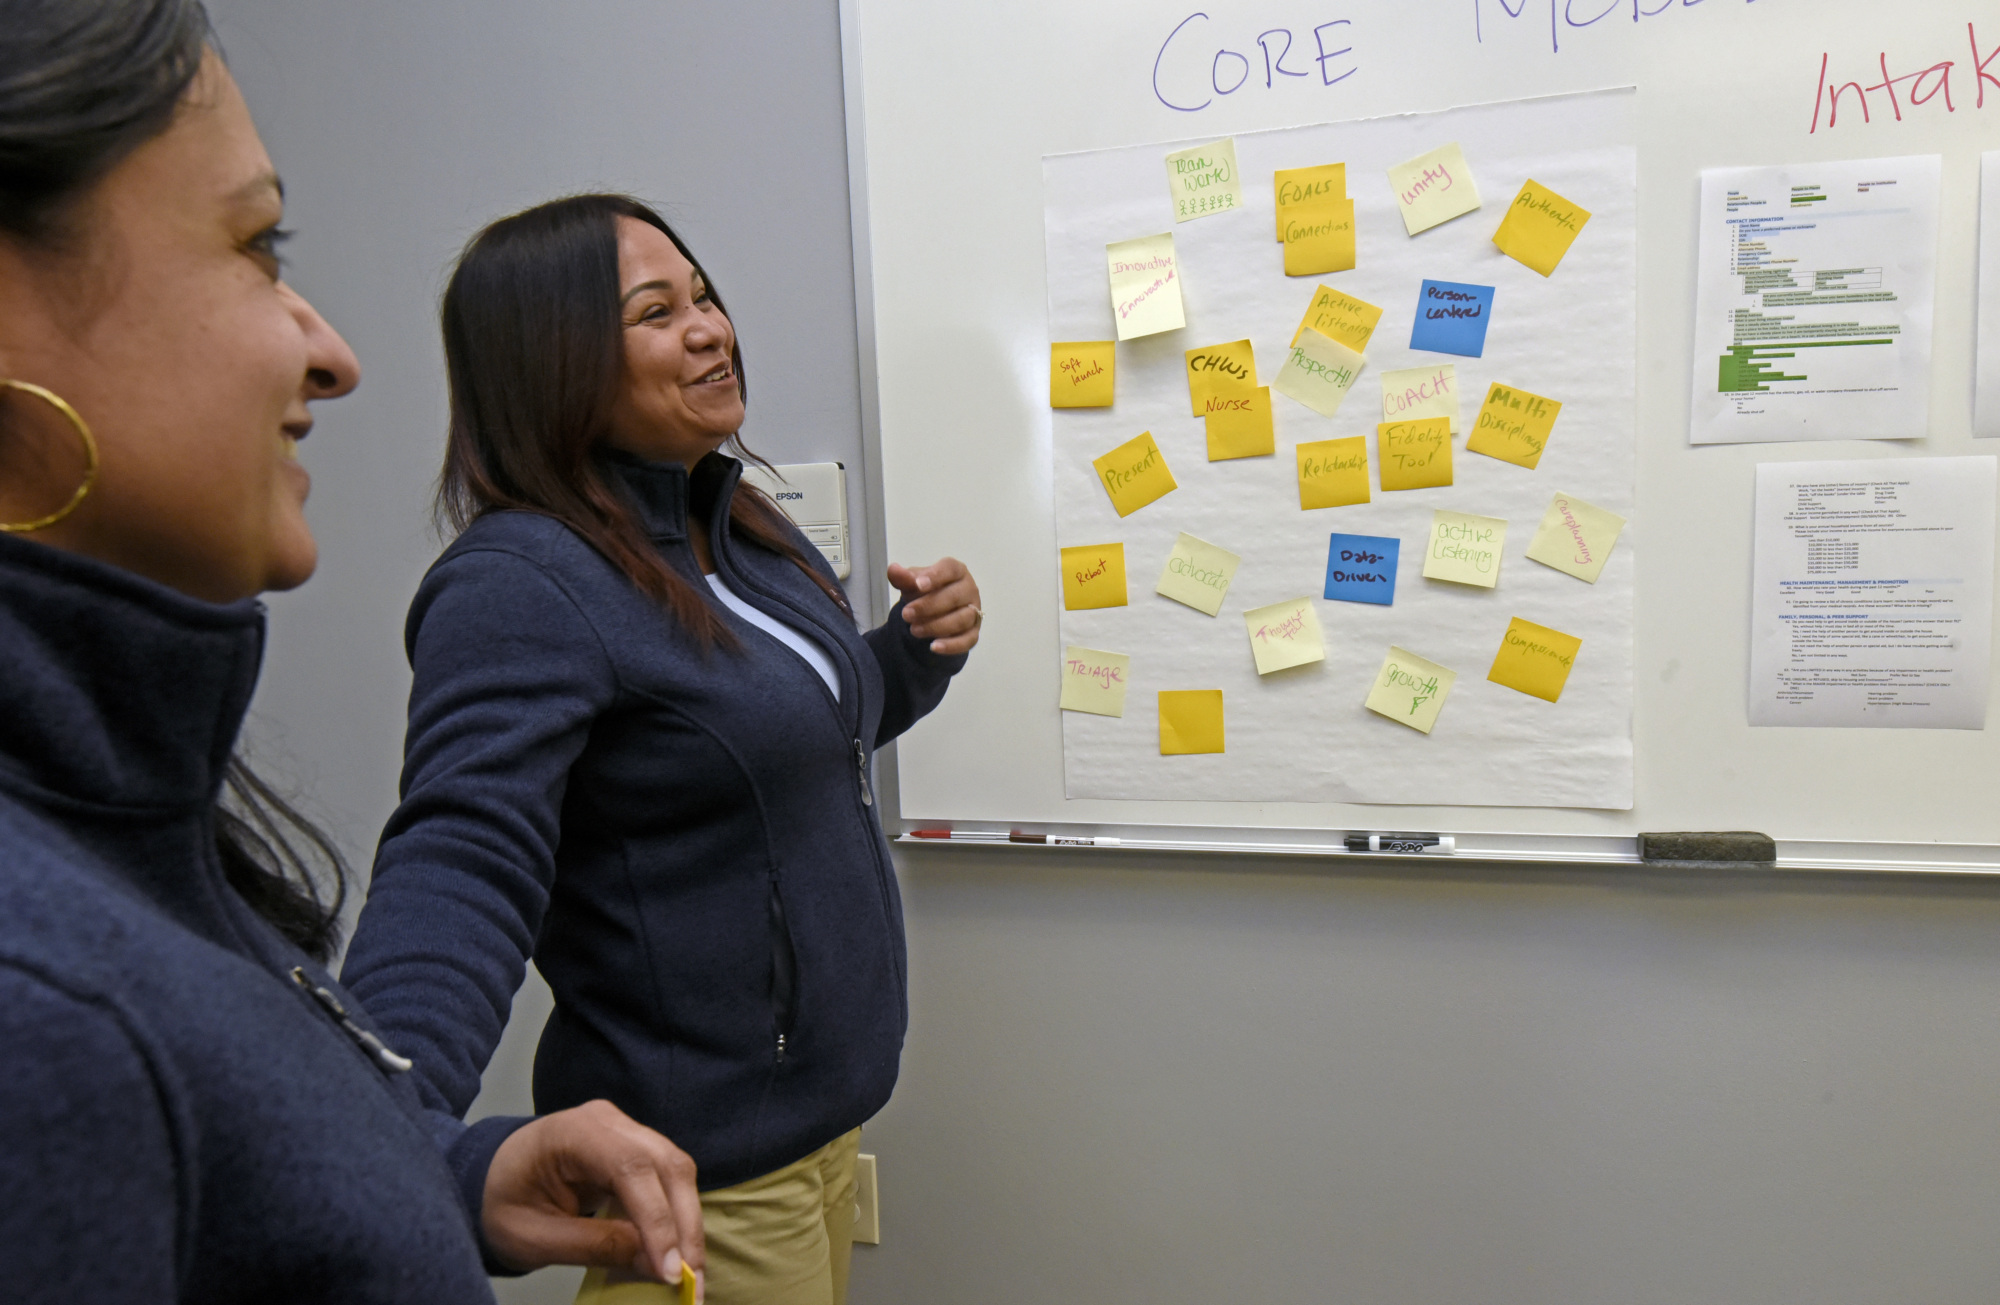 Camden Coalition staff laugh in front of white board covered with post-its